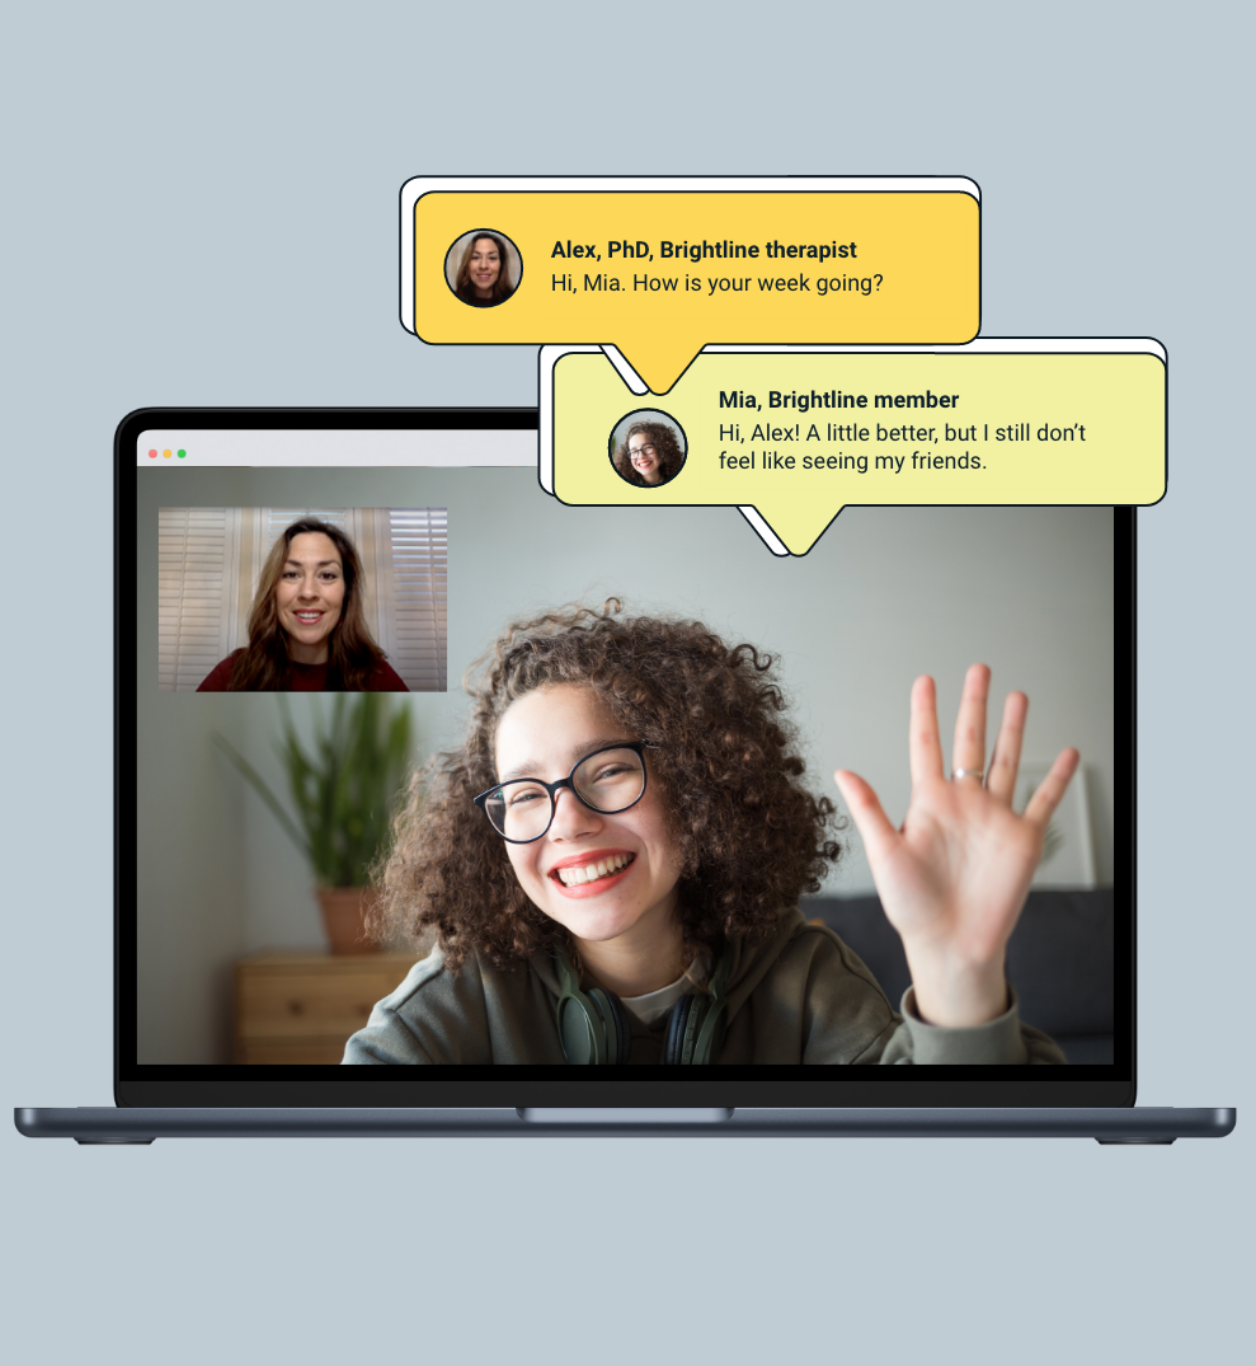 Girl in laptop screen waving to coach during online session, chat bubbles showing their conversation